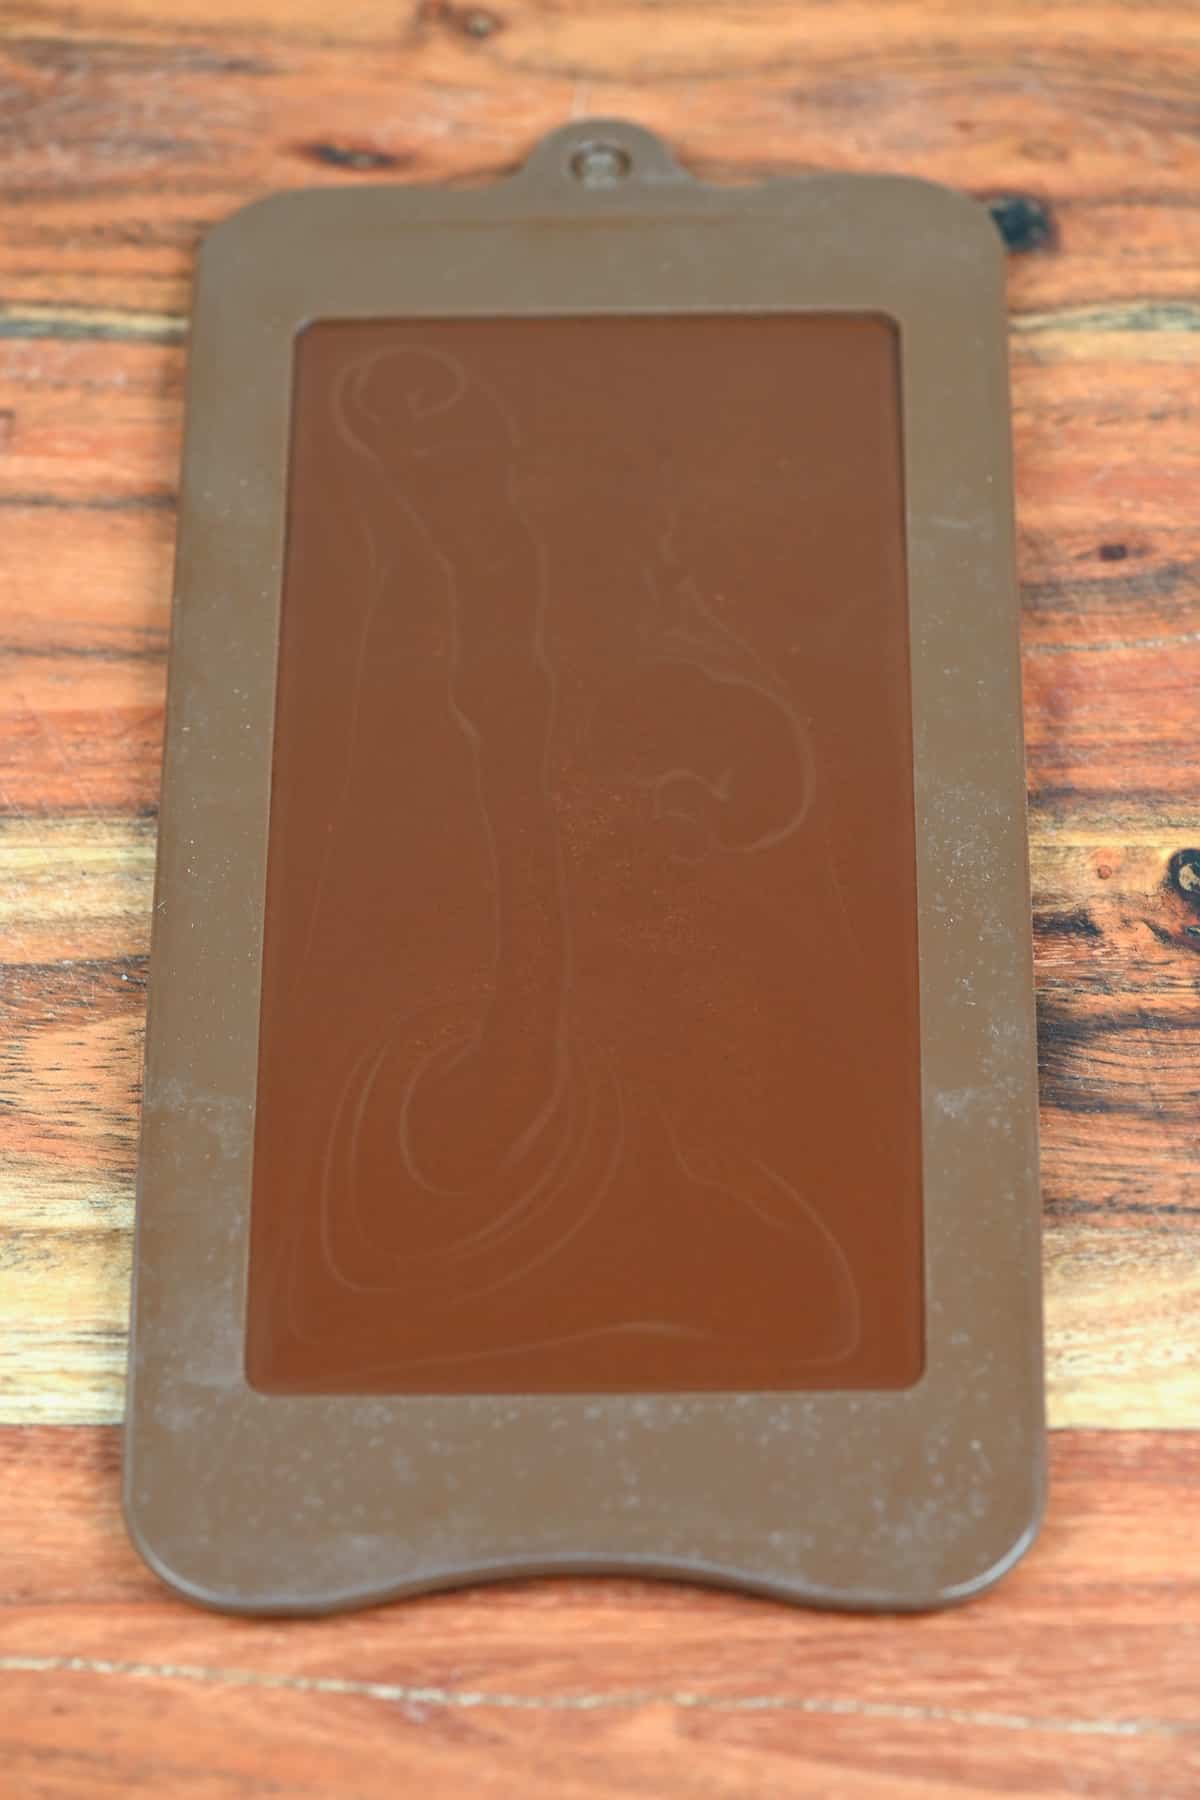 Chocolate poured into a mold